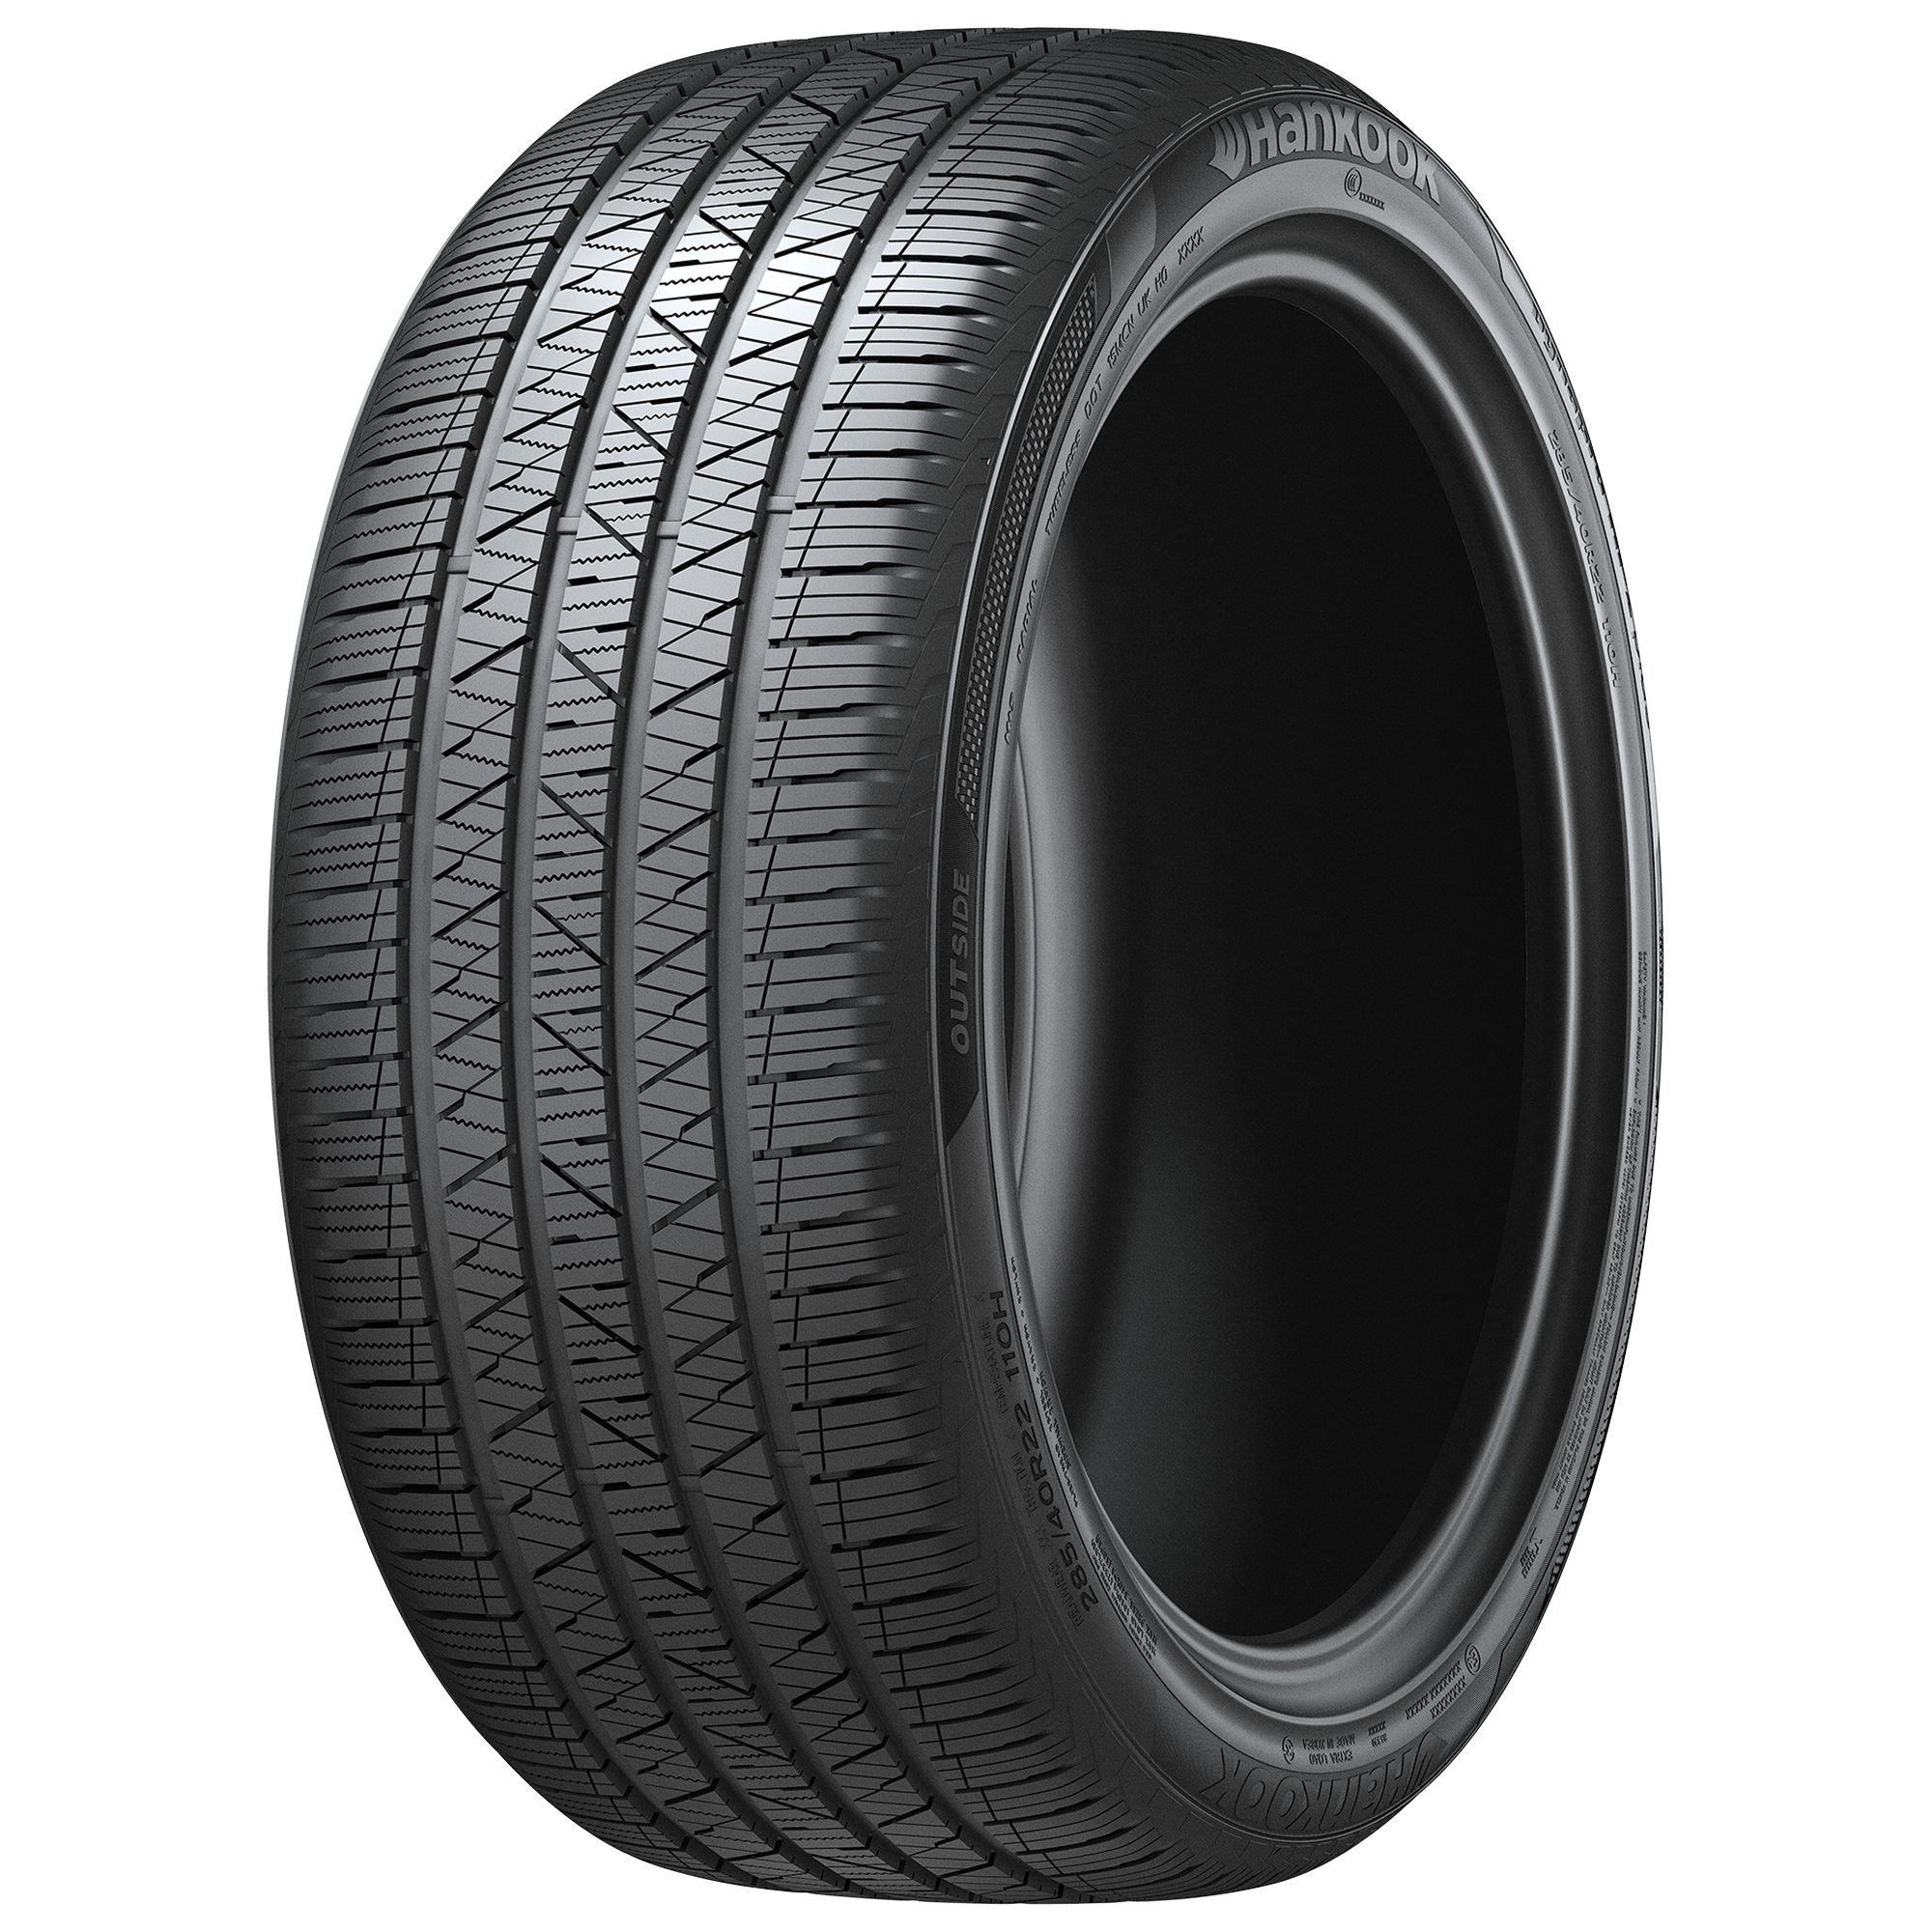 HANKOOK DYNAPRO HP2 PLUS (RA33D) (AO) 275/50R20 113H BSW